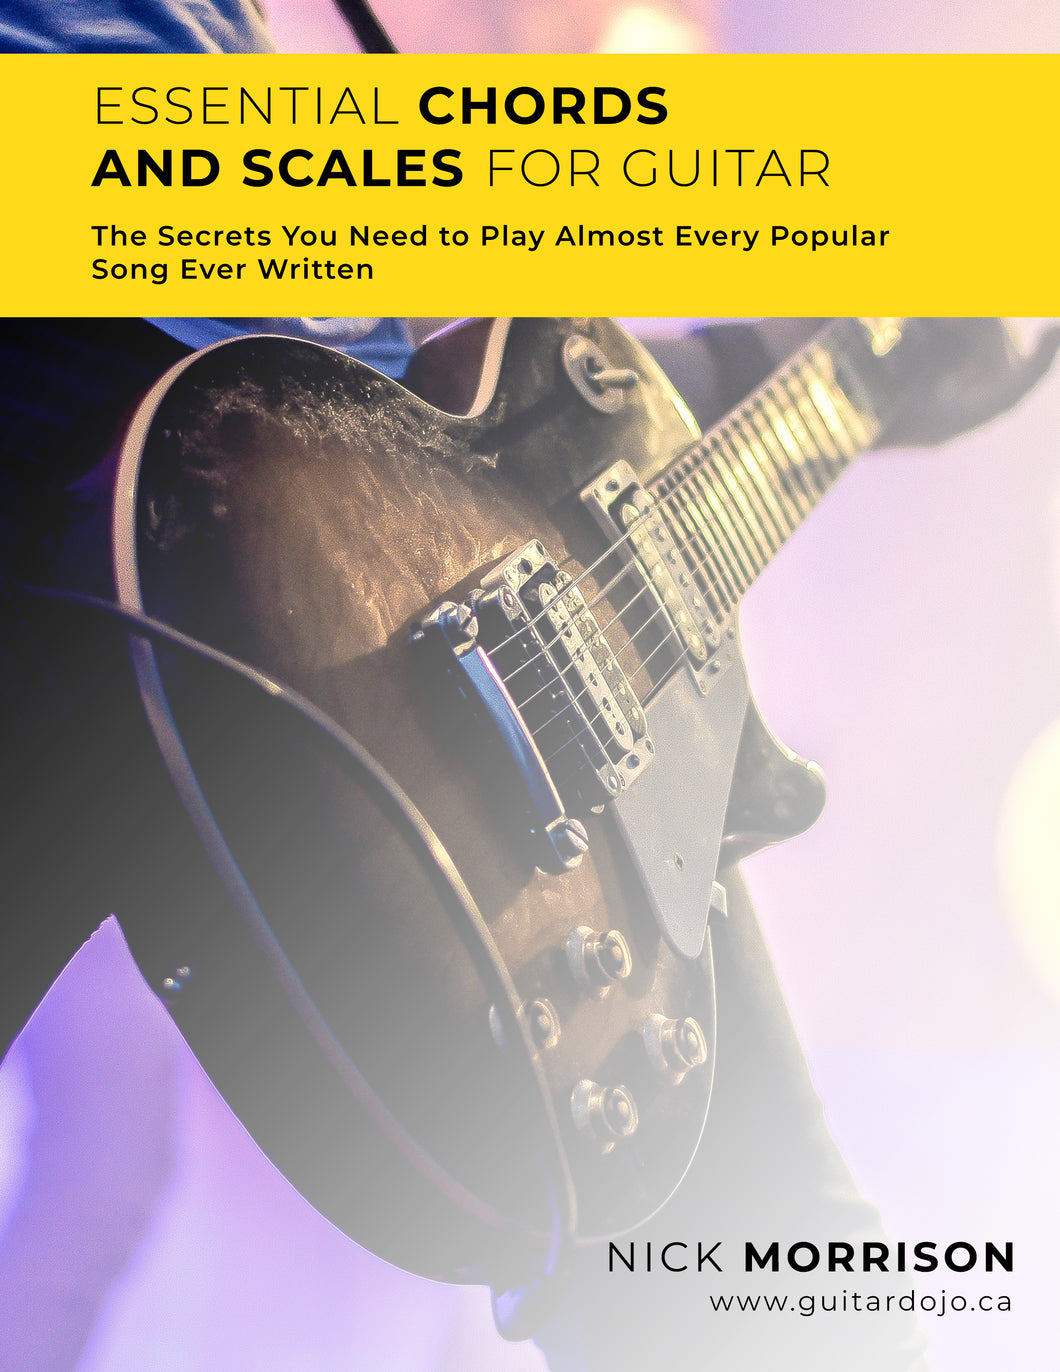 Essential Chords and Scales: The Secrets you Need to Play Almost Every Popular Song Ever Written!